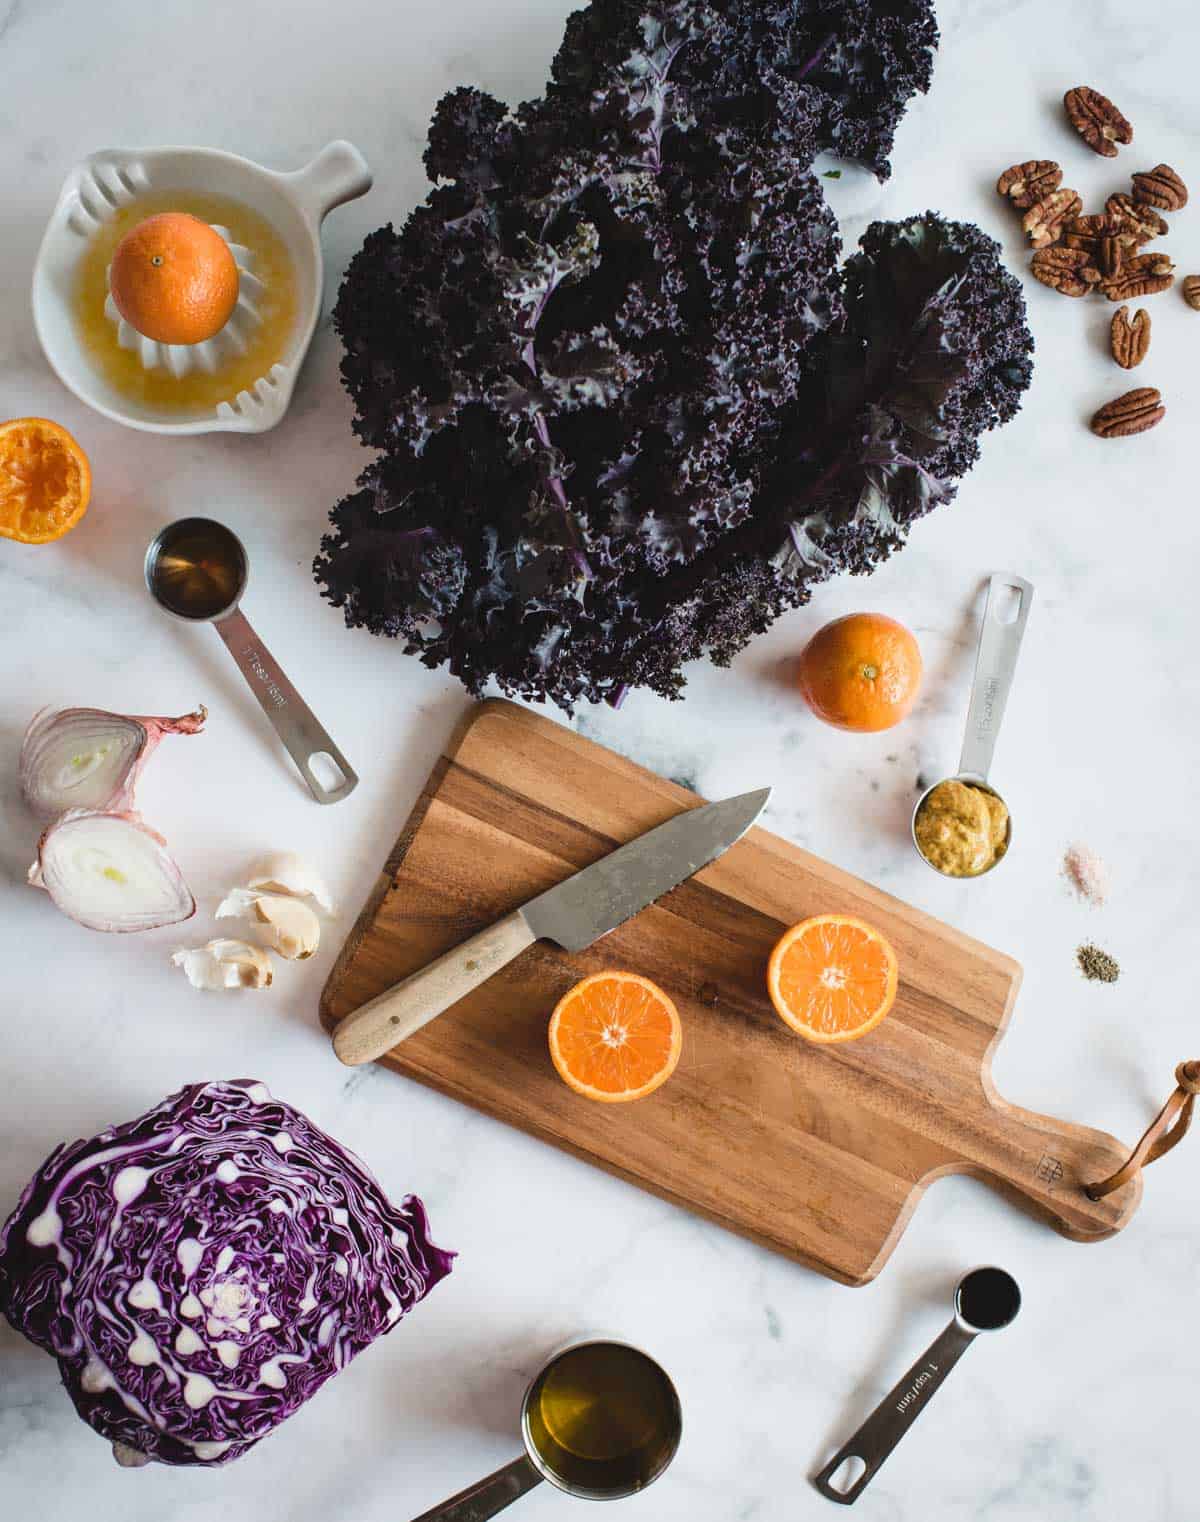 ingredients for kale salad laid out on a marble backdrop including kale, red cabbage, shallot, mandarin oranges, mustard, pecans, oil, and other seasonings